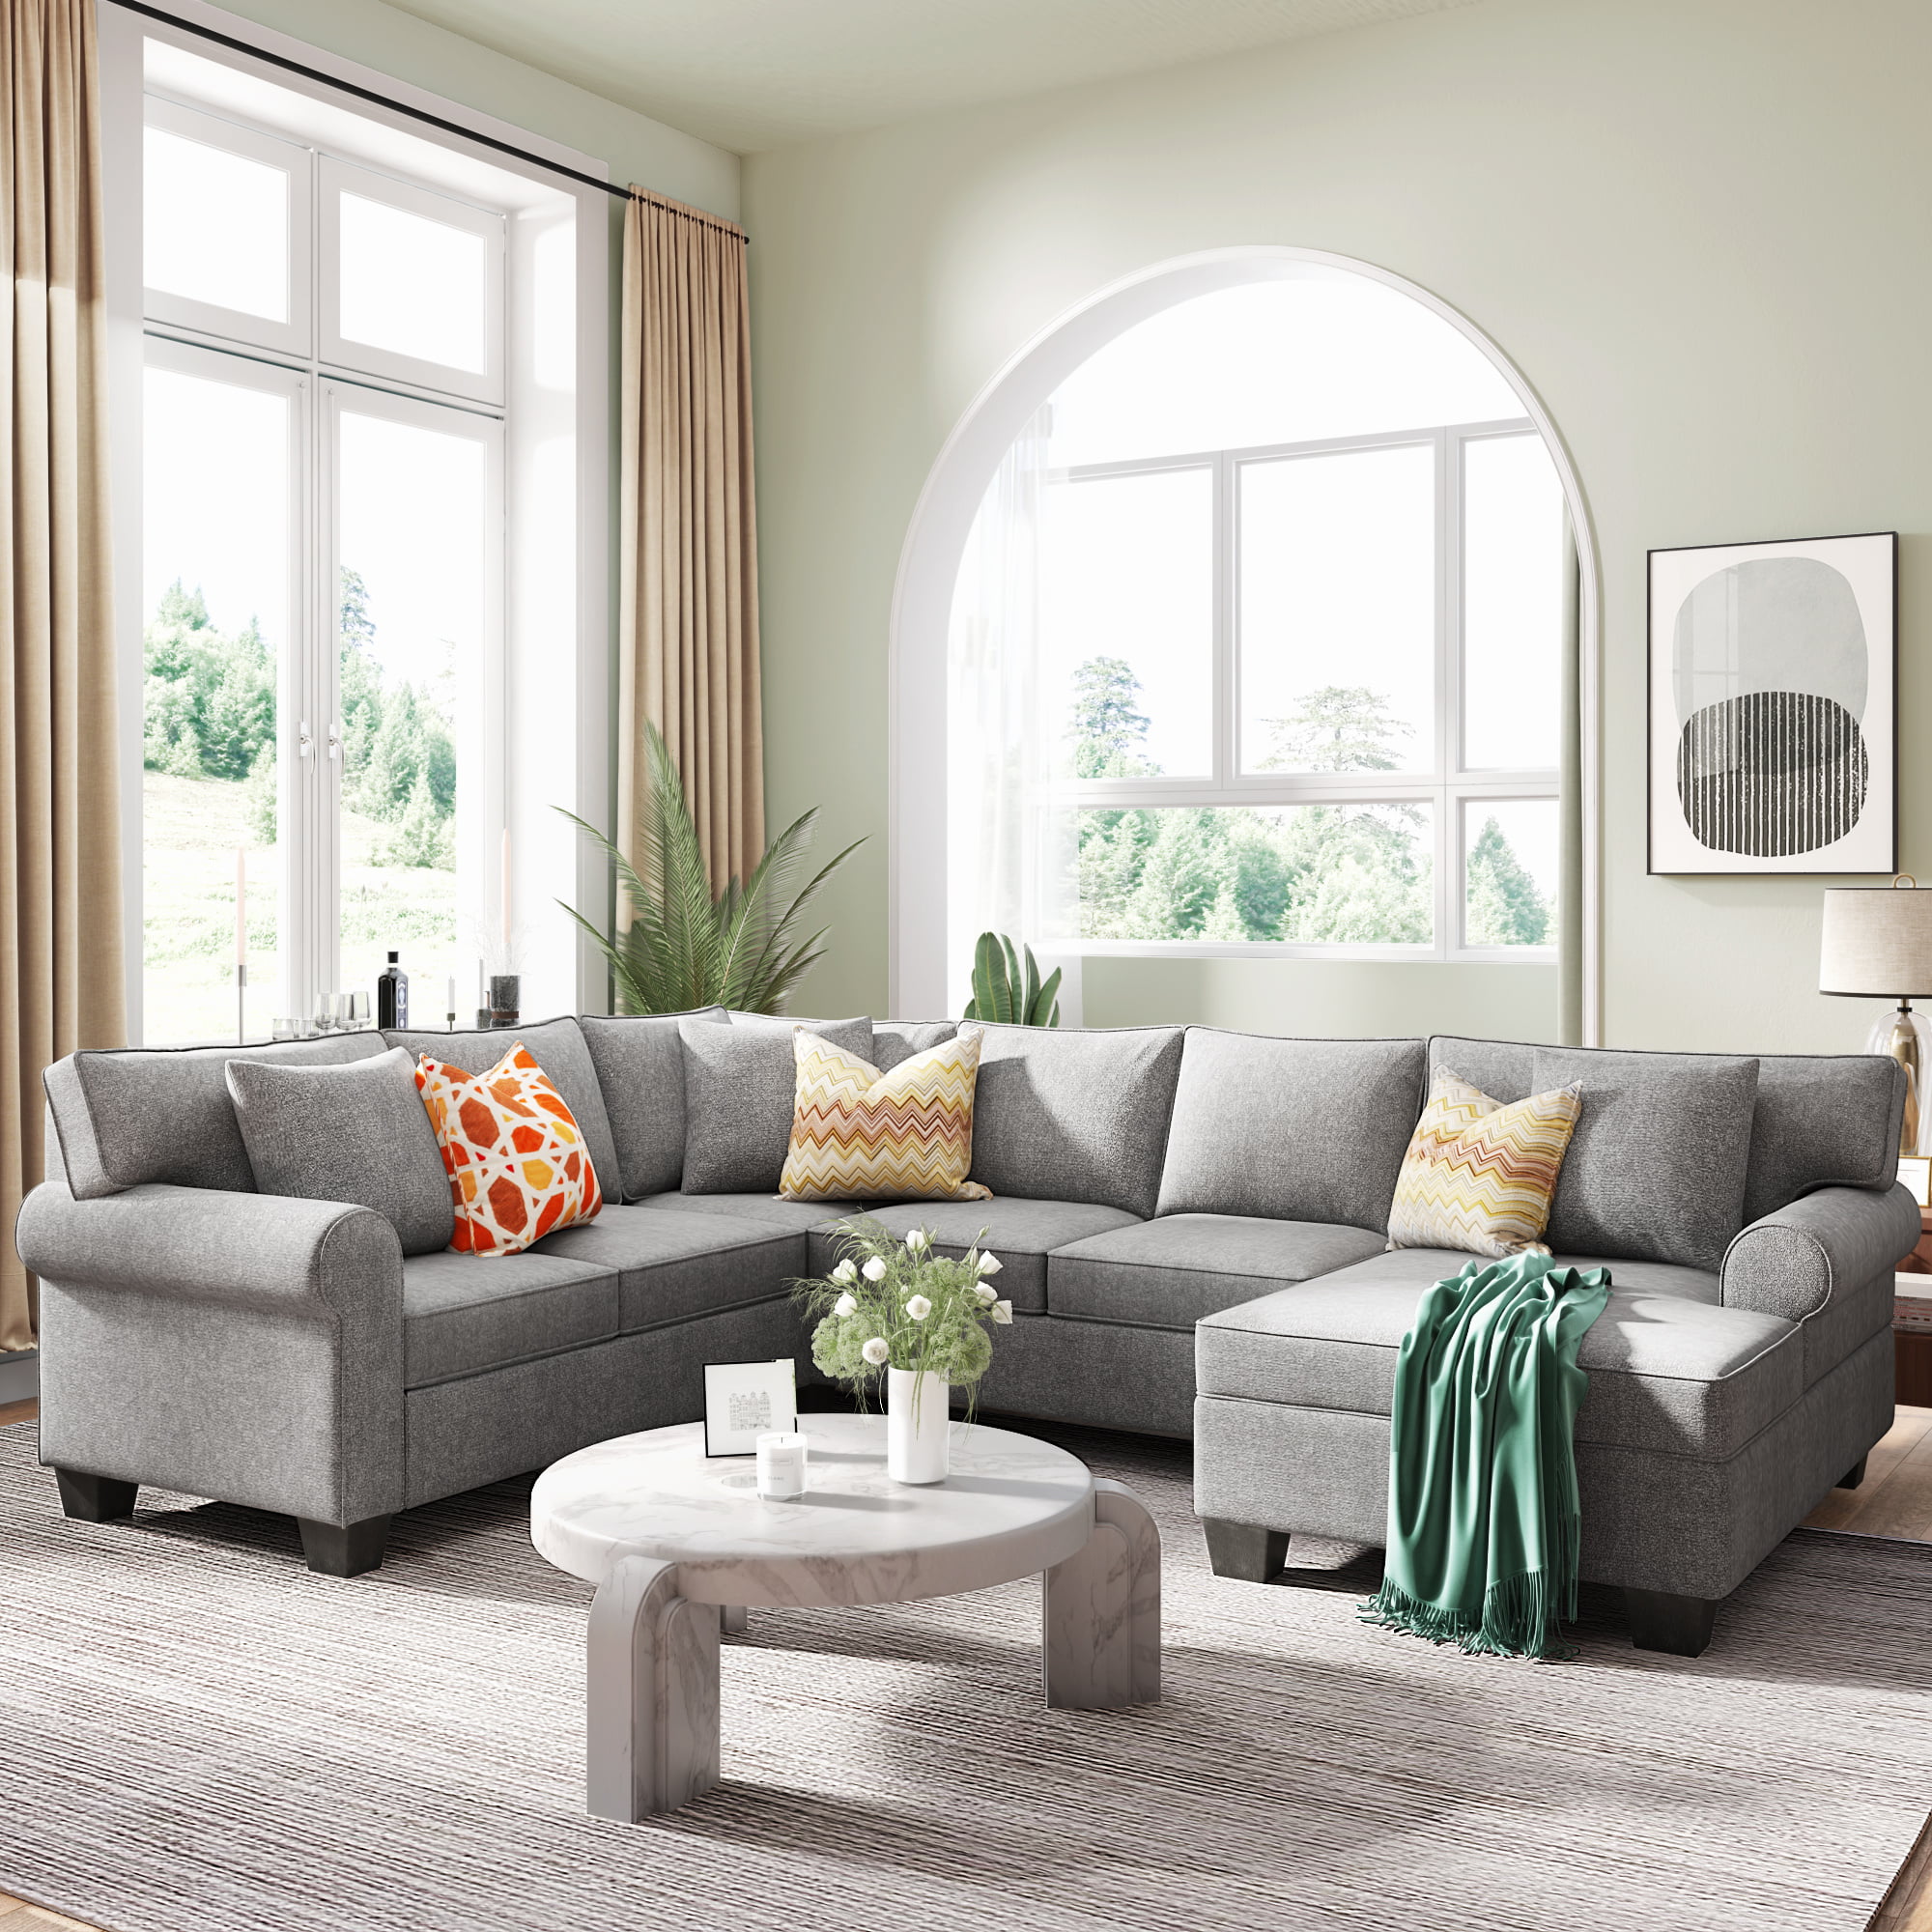 Home Furniture Gray STARTO Pieces Sectional Sofa Set Upholstered Rolled Arm L-Shaped Couch 3 Pillows Include for Living Room